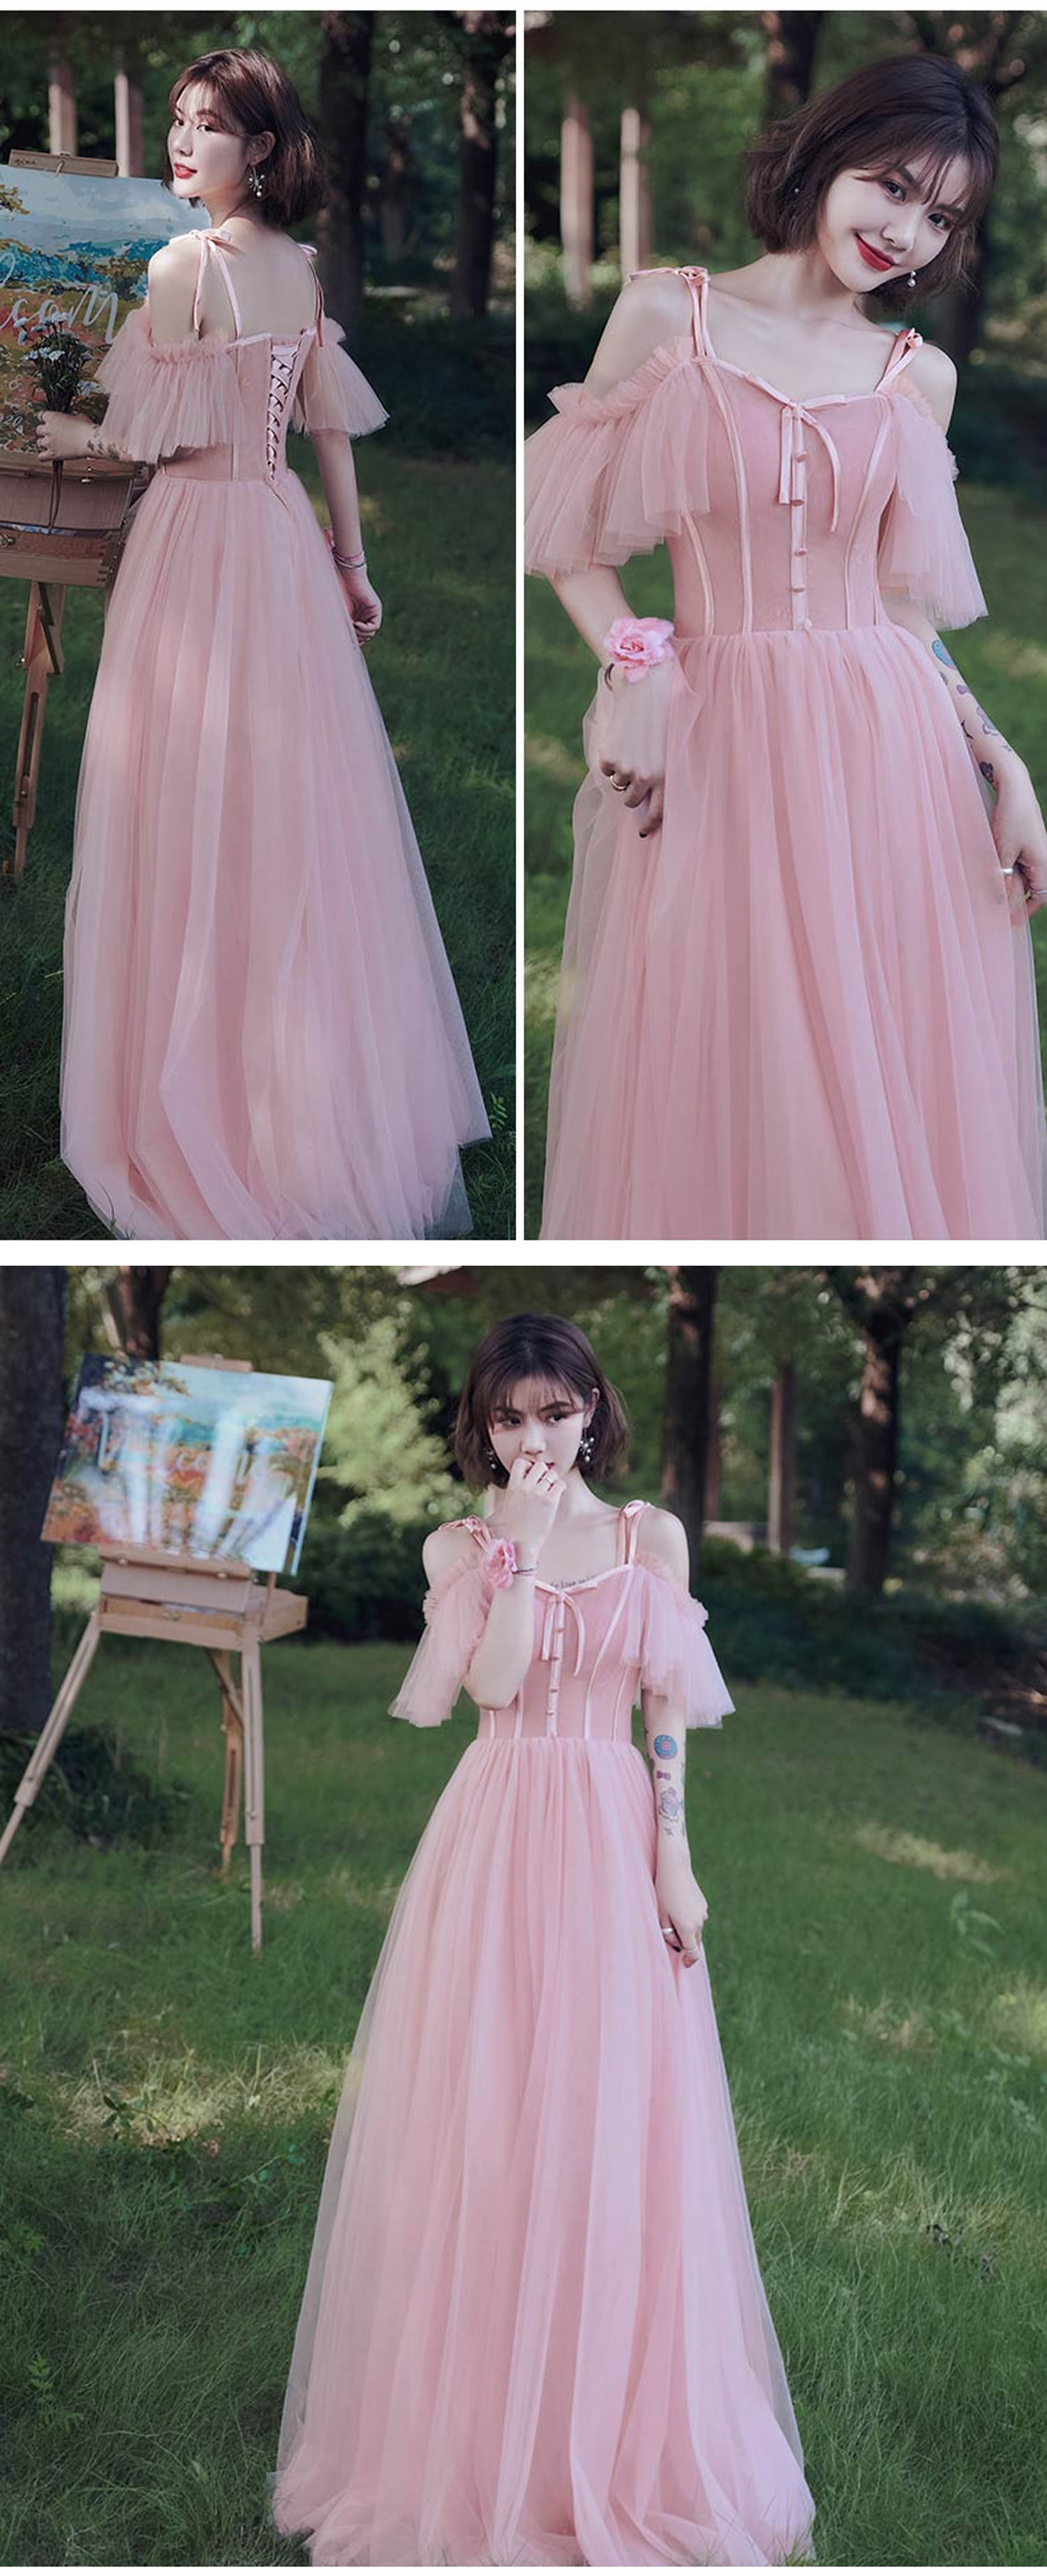 Feminine-Sweet-Pink-Tulle-Bridesmaid-Dress-Prom-Party-Ball-Gown15